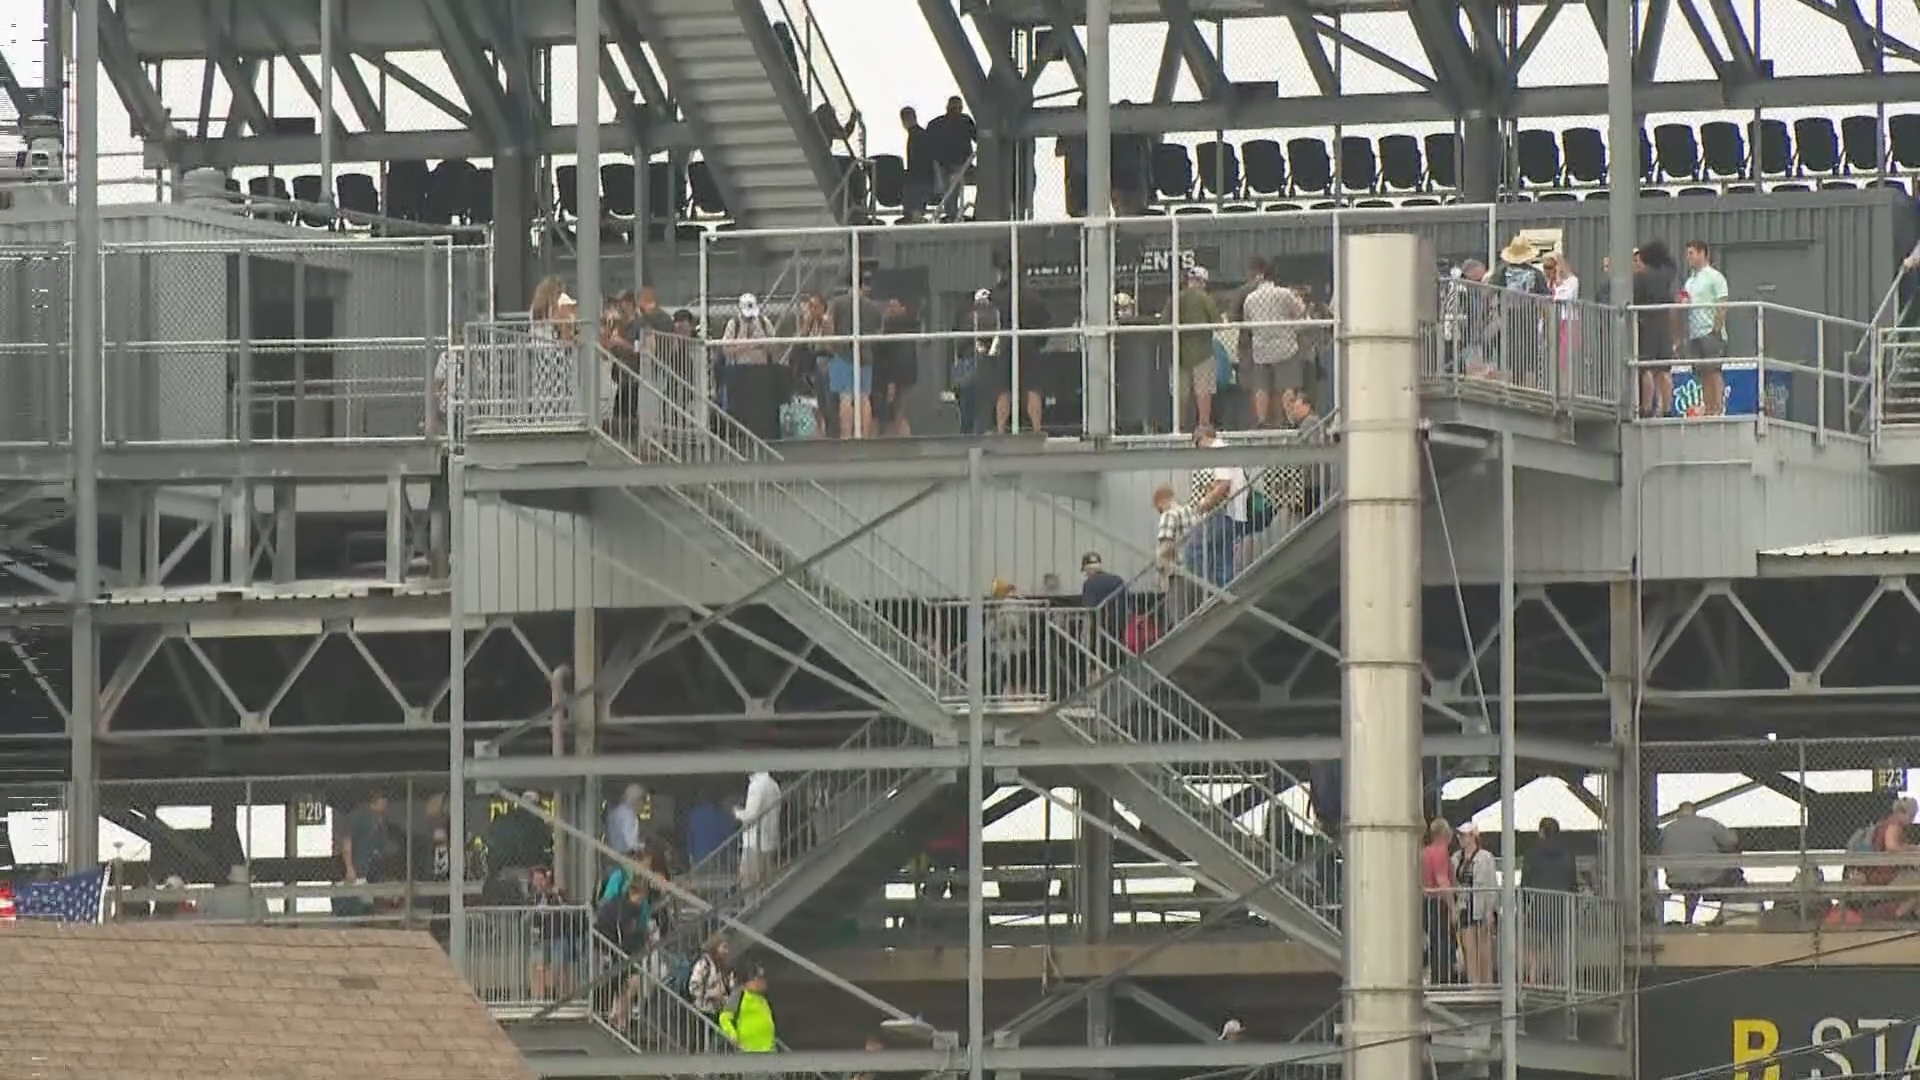 IMS has announced it is delaying the start of the Indy 500. No time has been given as to when the race will start.